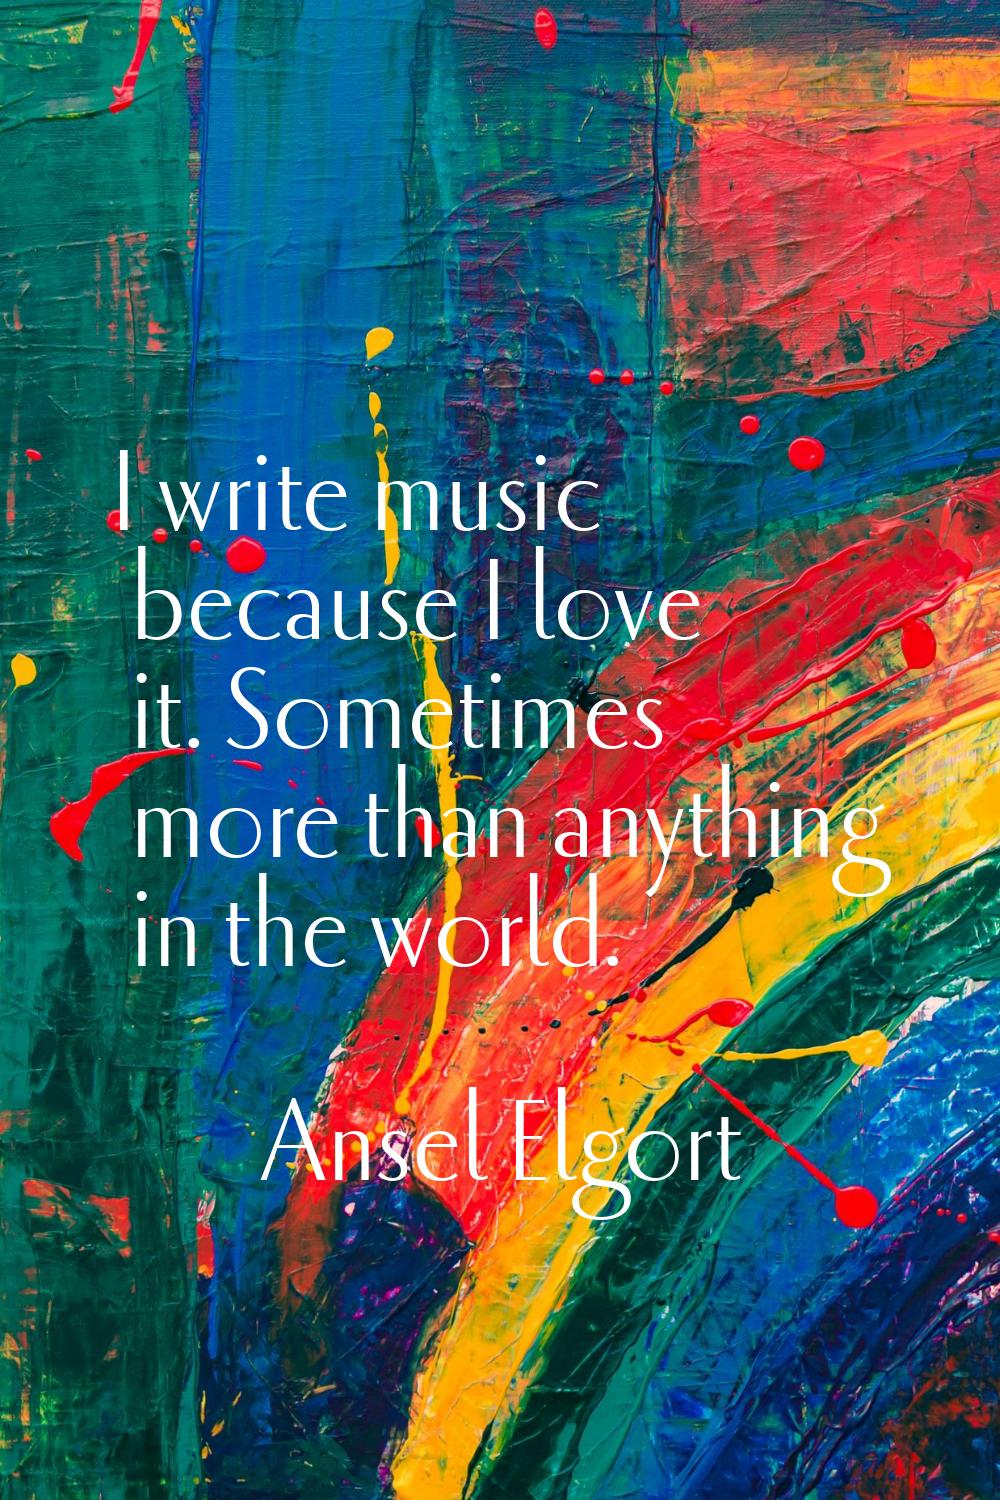 I write music because I love it. Sometimes more than anything in the world.